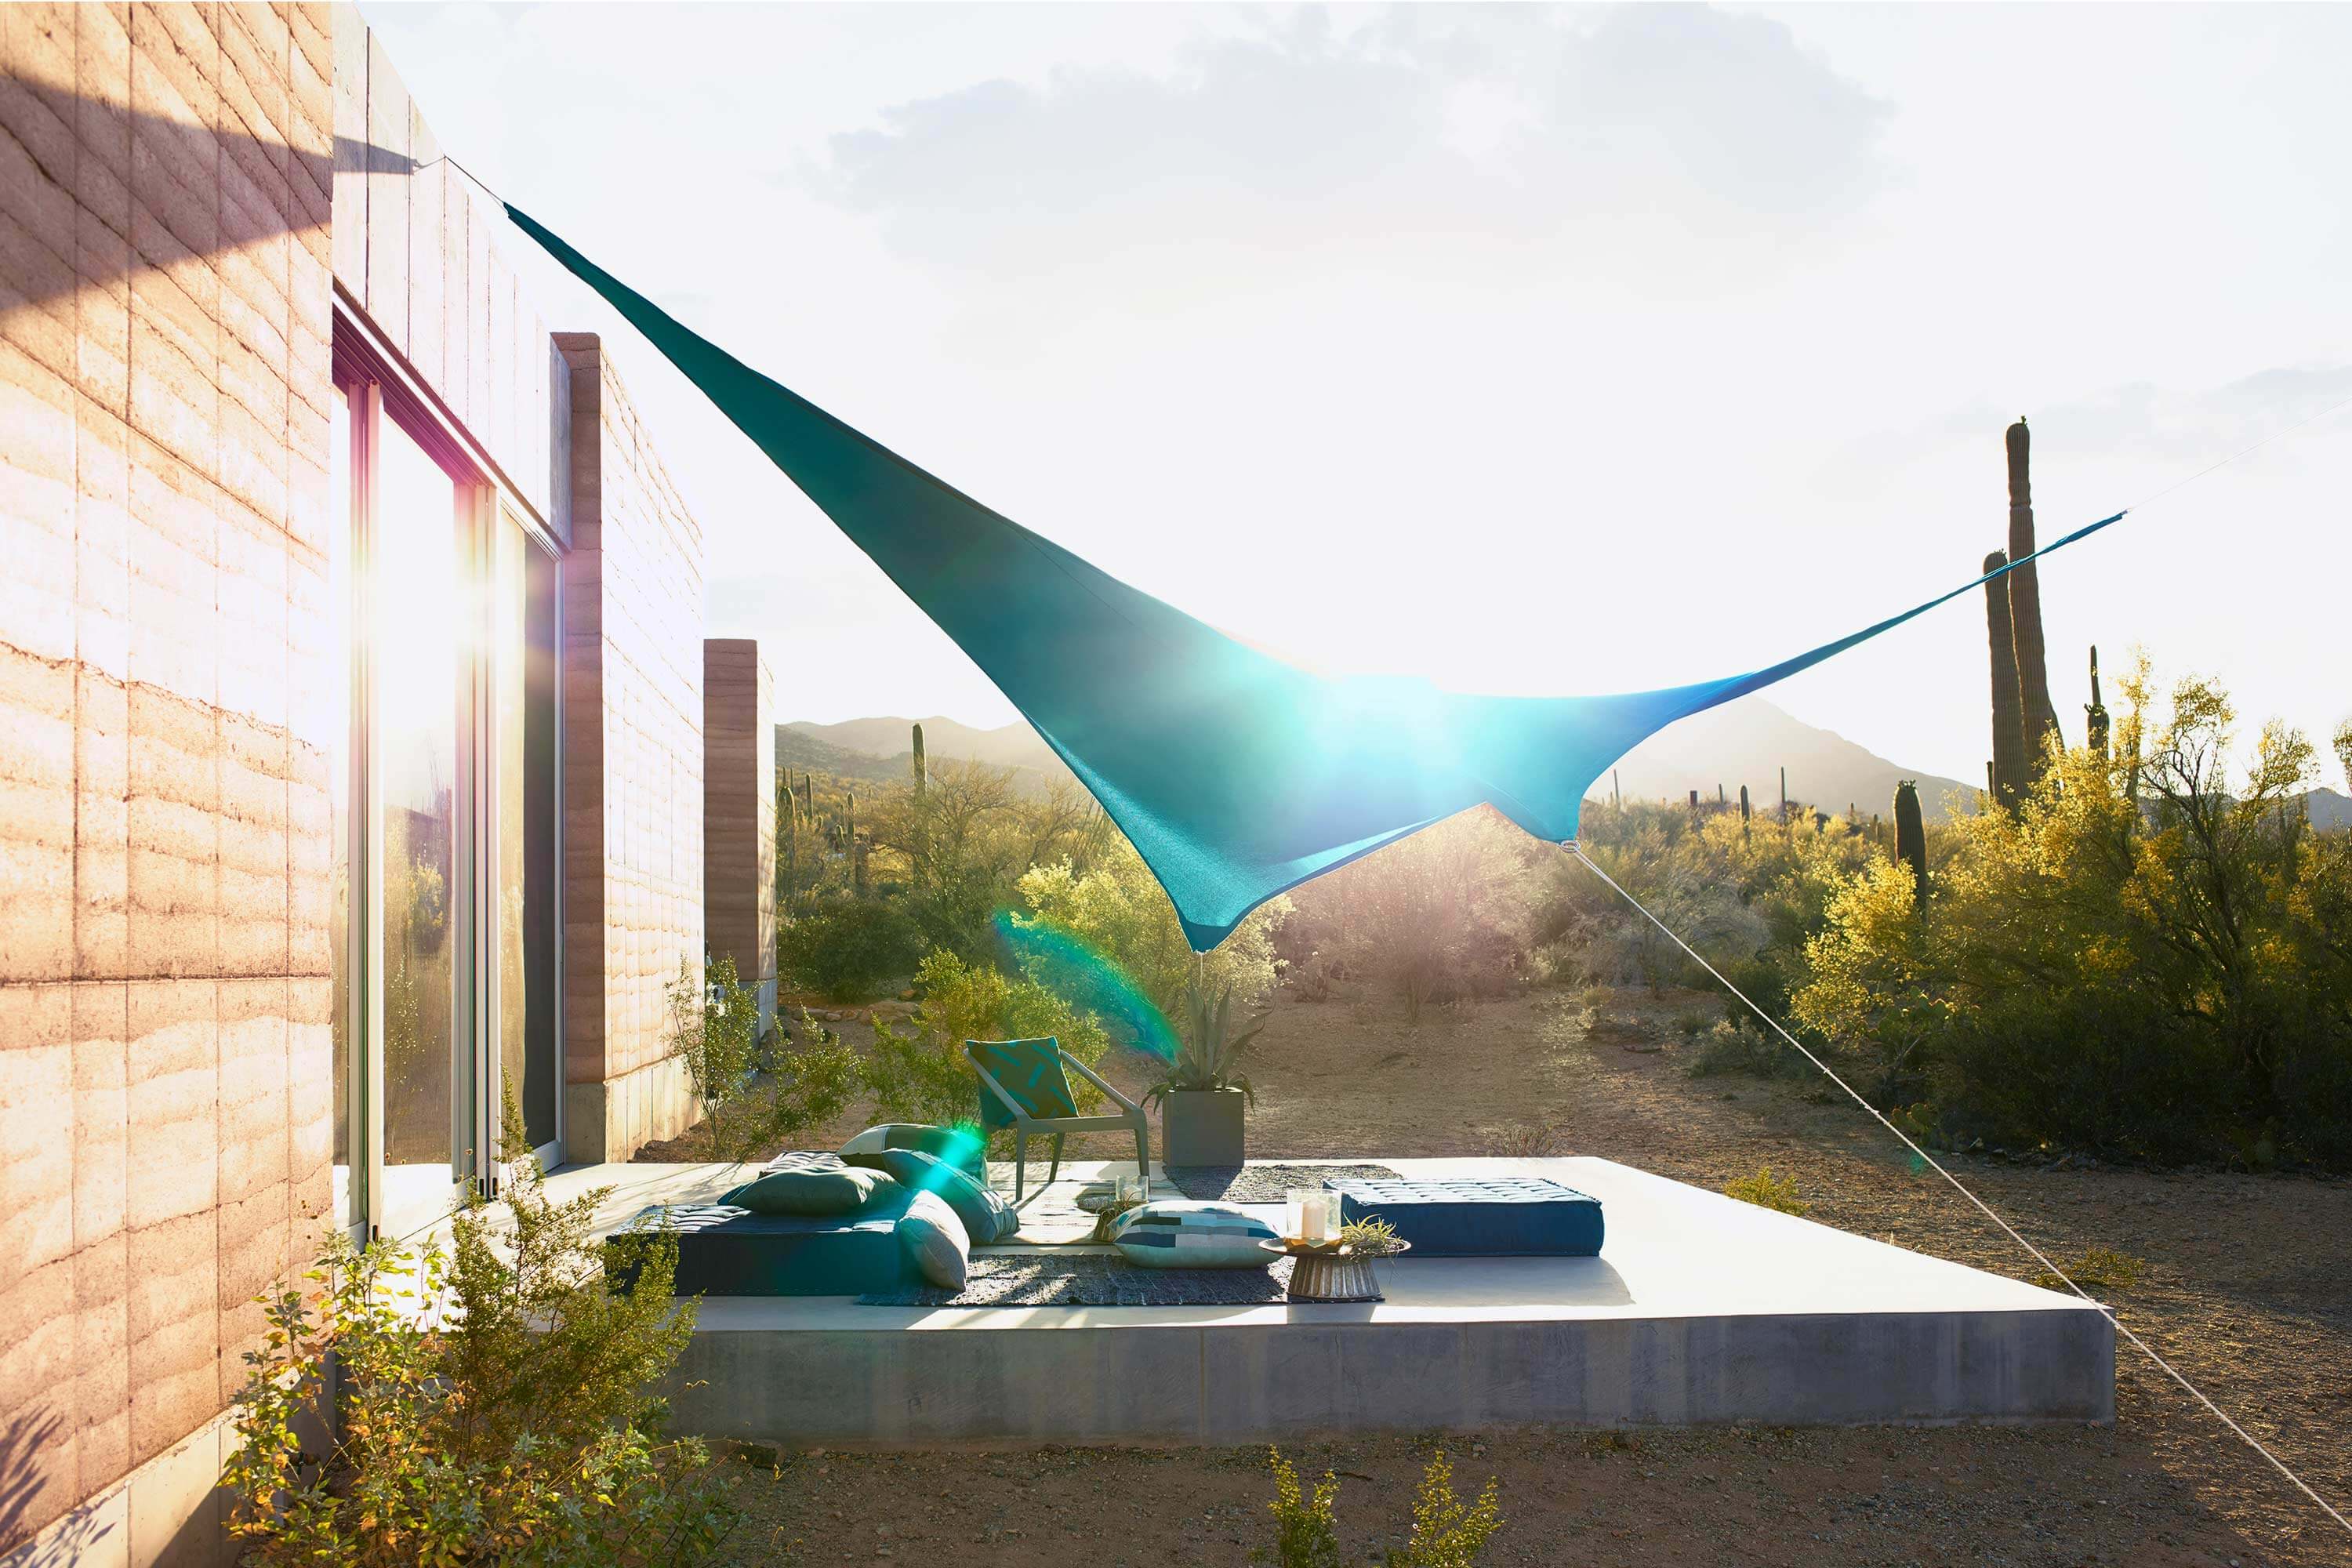 Outdoor patio in the desert covered with shade sail made using teal Sunbrella Contour fabric